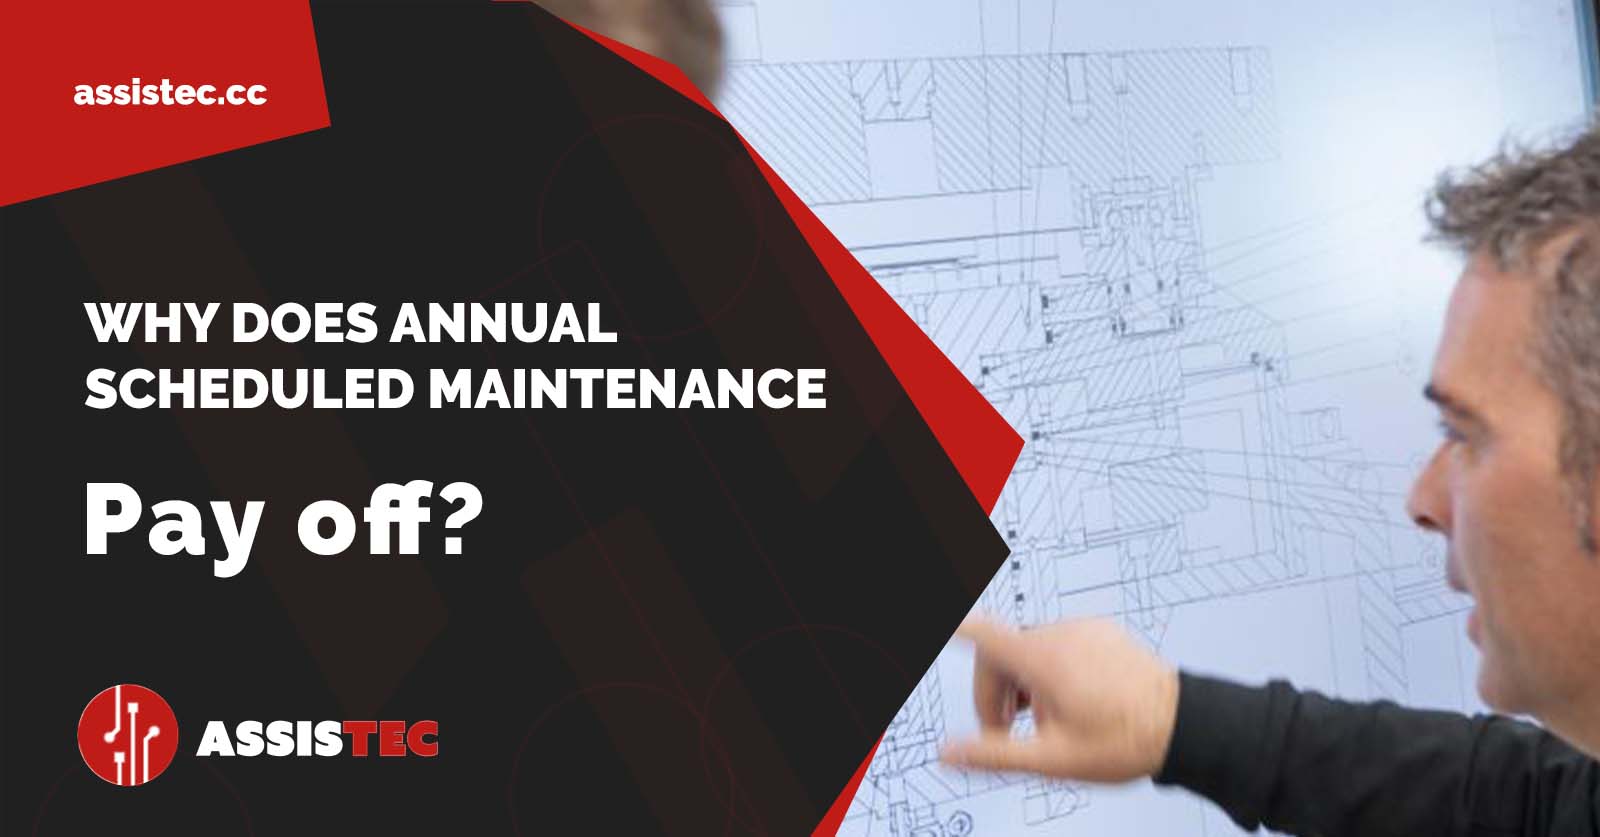 Why does annual scheduled maintenance pay off?